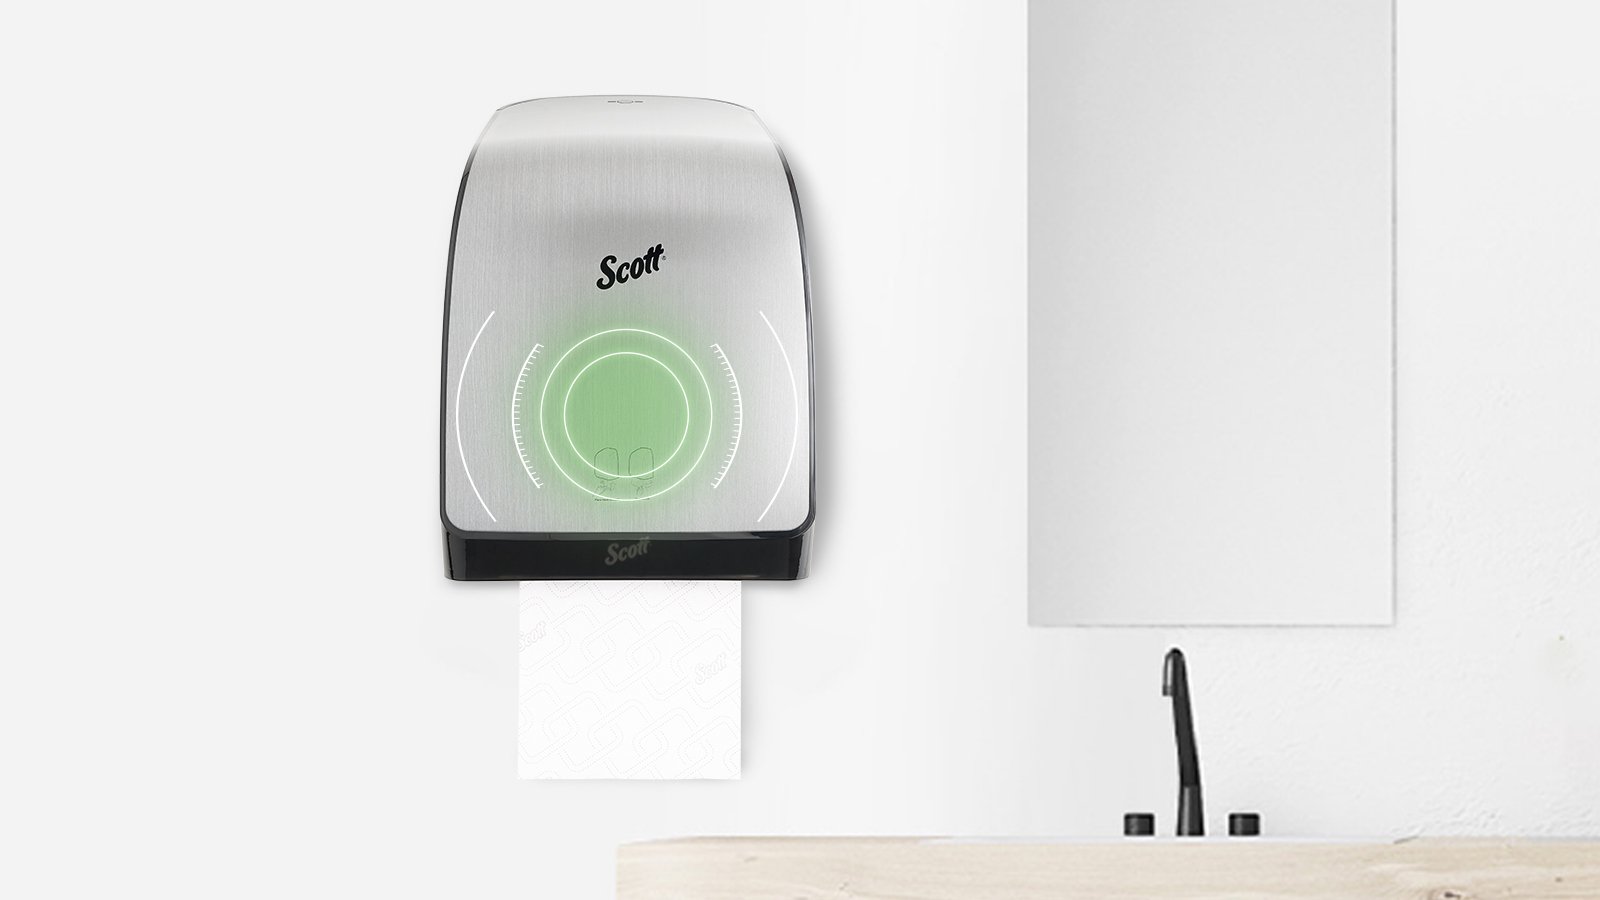 Smart technology paper towel and soap dispensers mounted on restroom wall